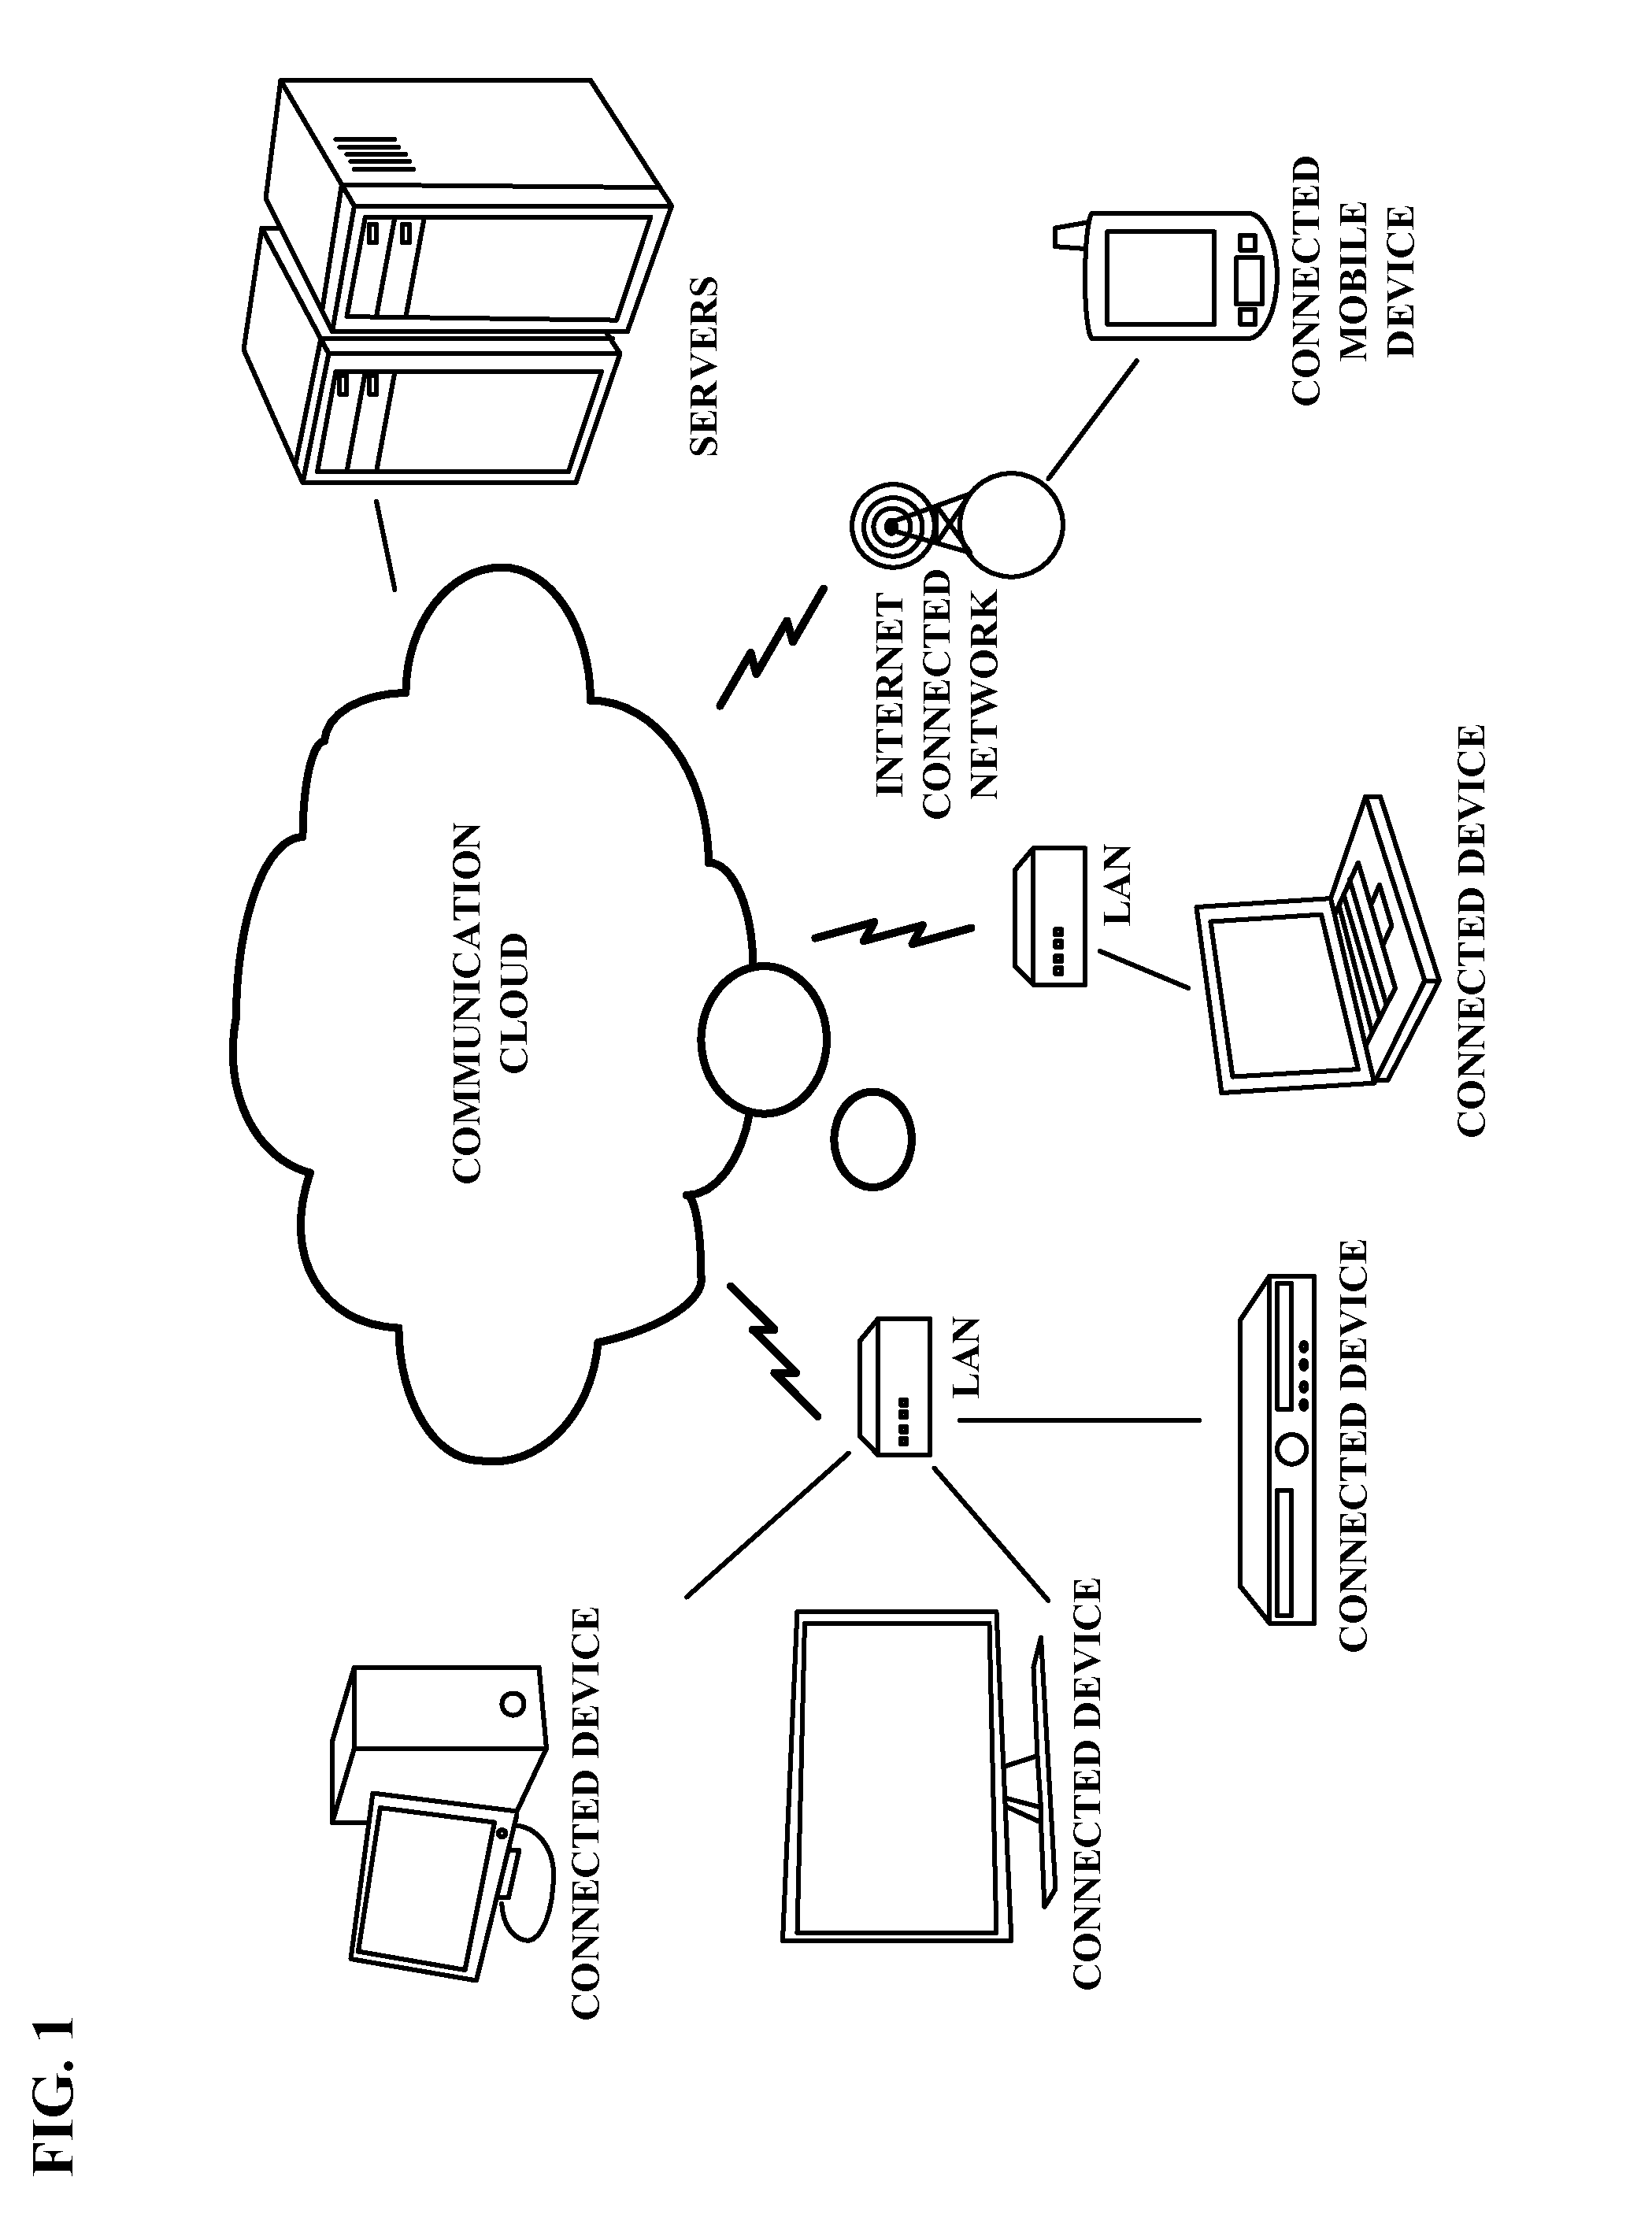 Device interconnection and service discovery via a communication cloud